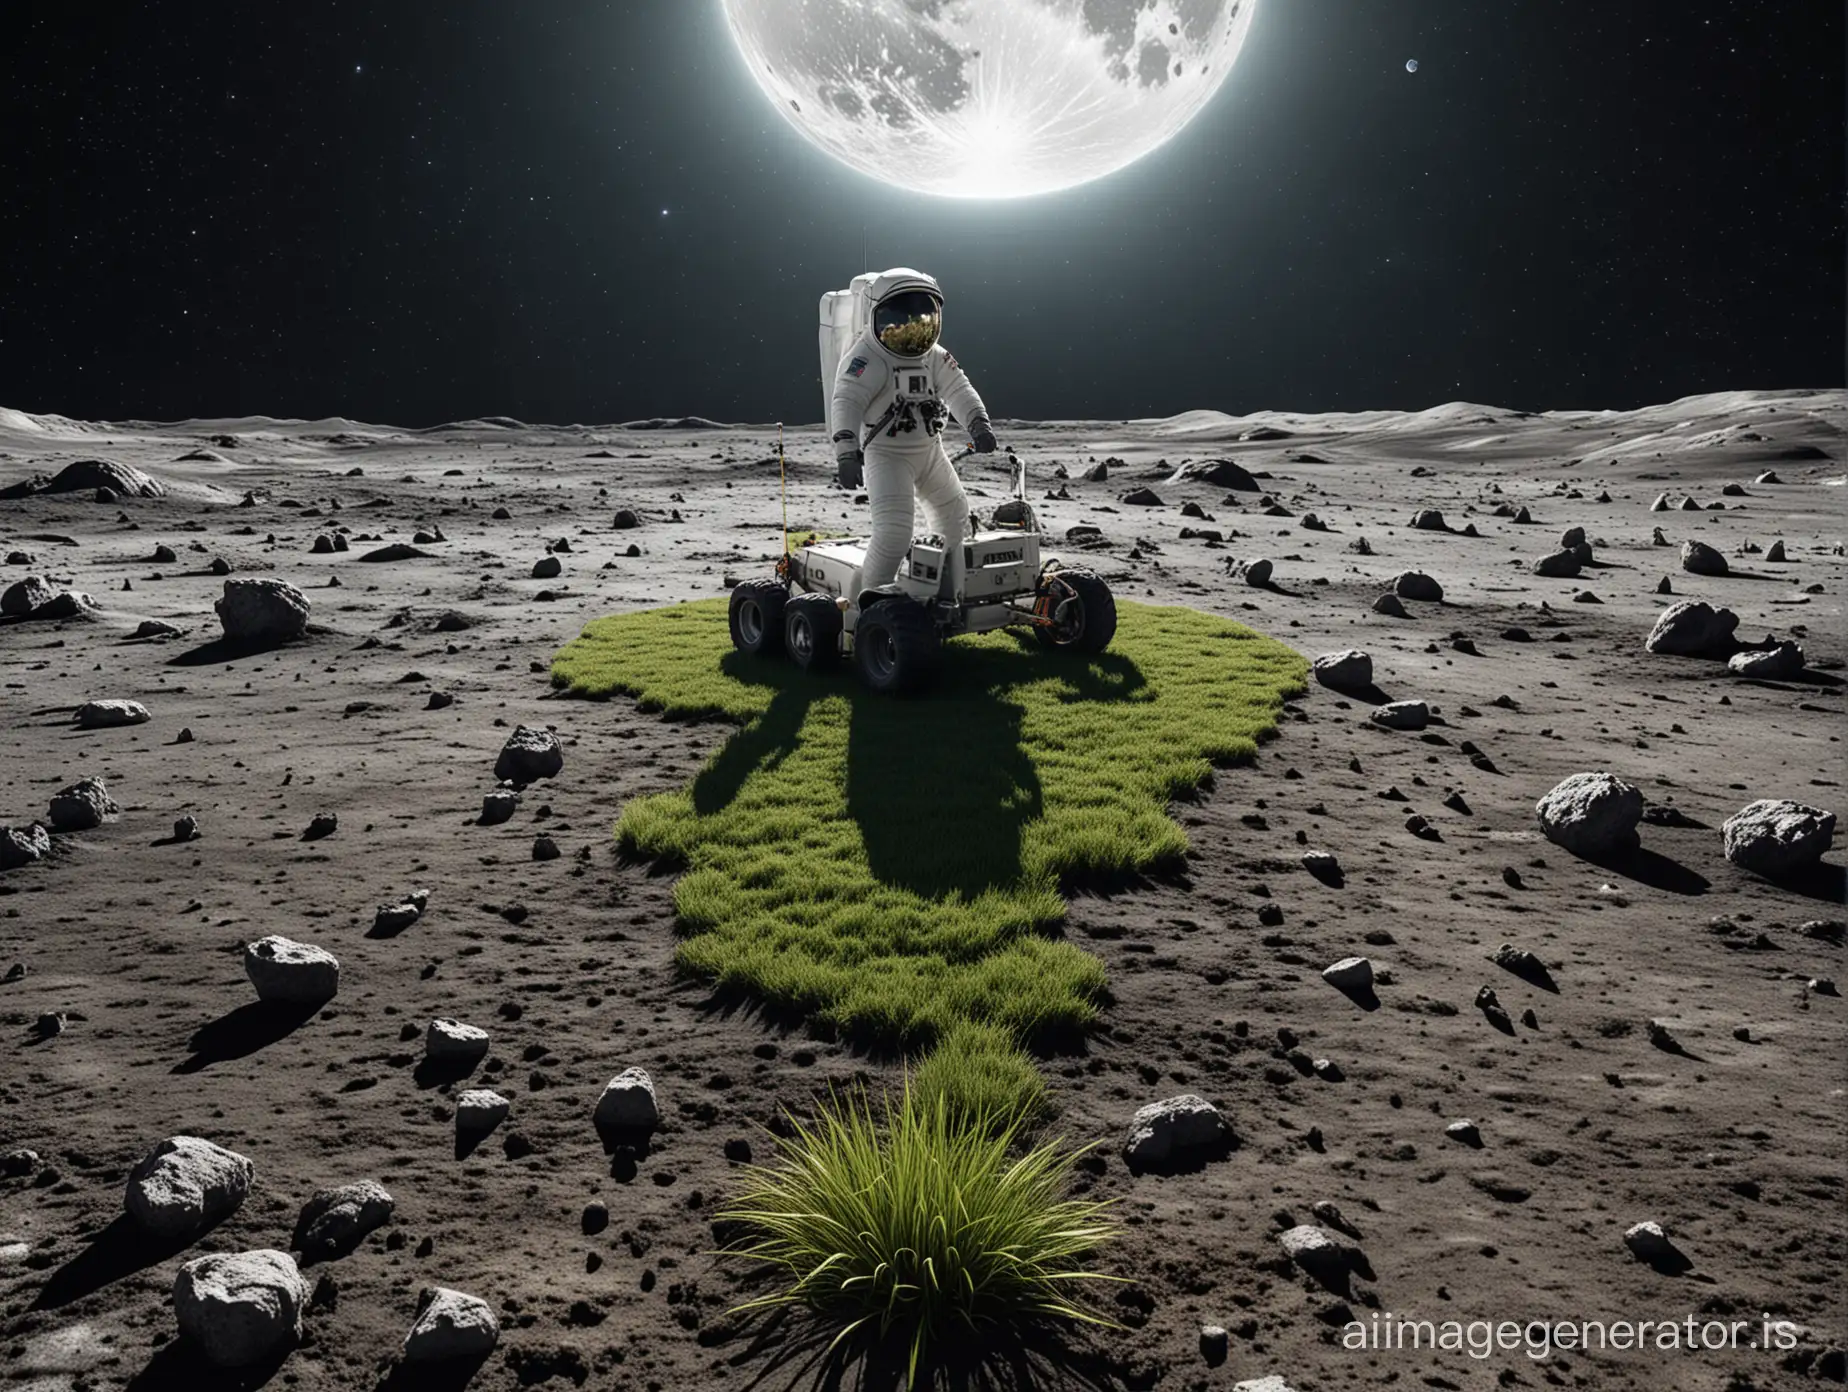 Concept: lawnmowing on the moon's surface
Foreground: An astronaut mows a small square of grass, surrounded by the lunar surface
Background: stars and the earth